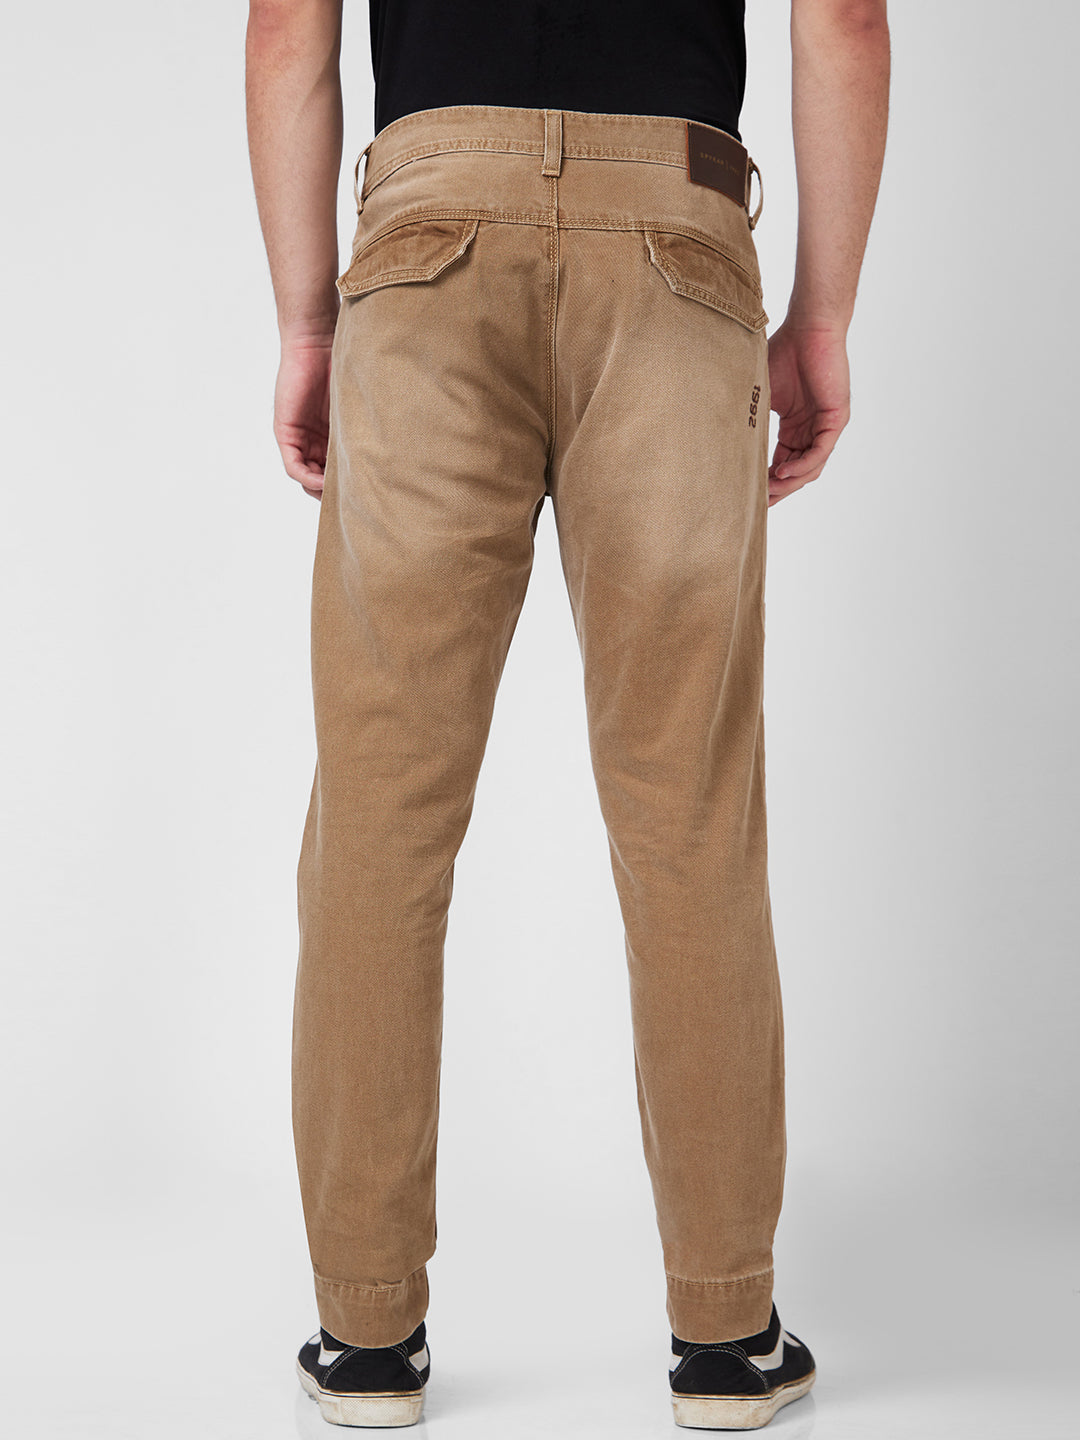 Green Solid Full Length Casual Men Comfort Fit Trousers - Selling Fast at  Pantaloons.com